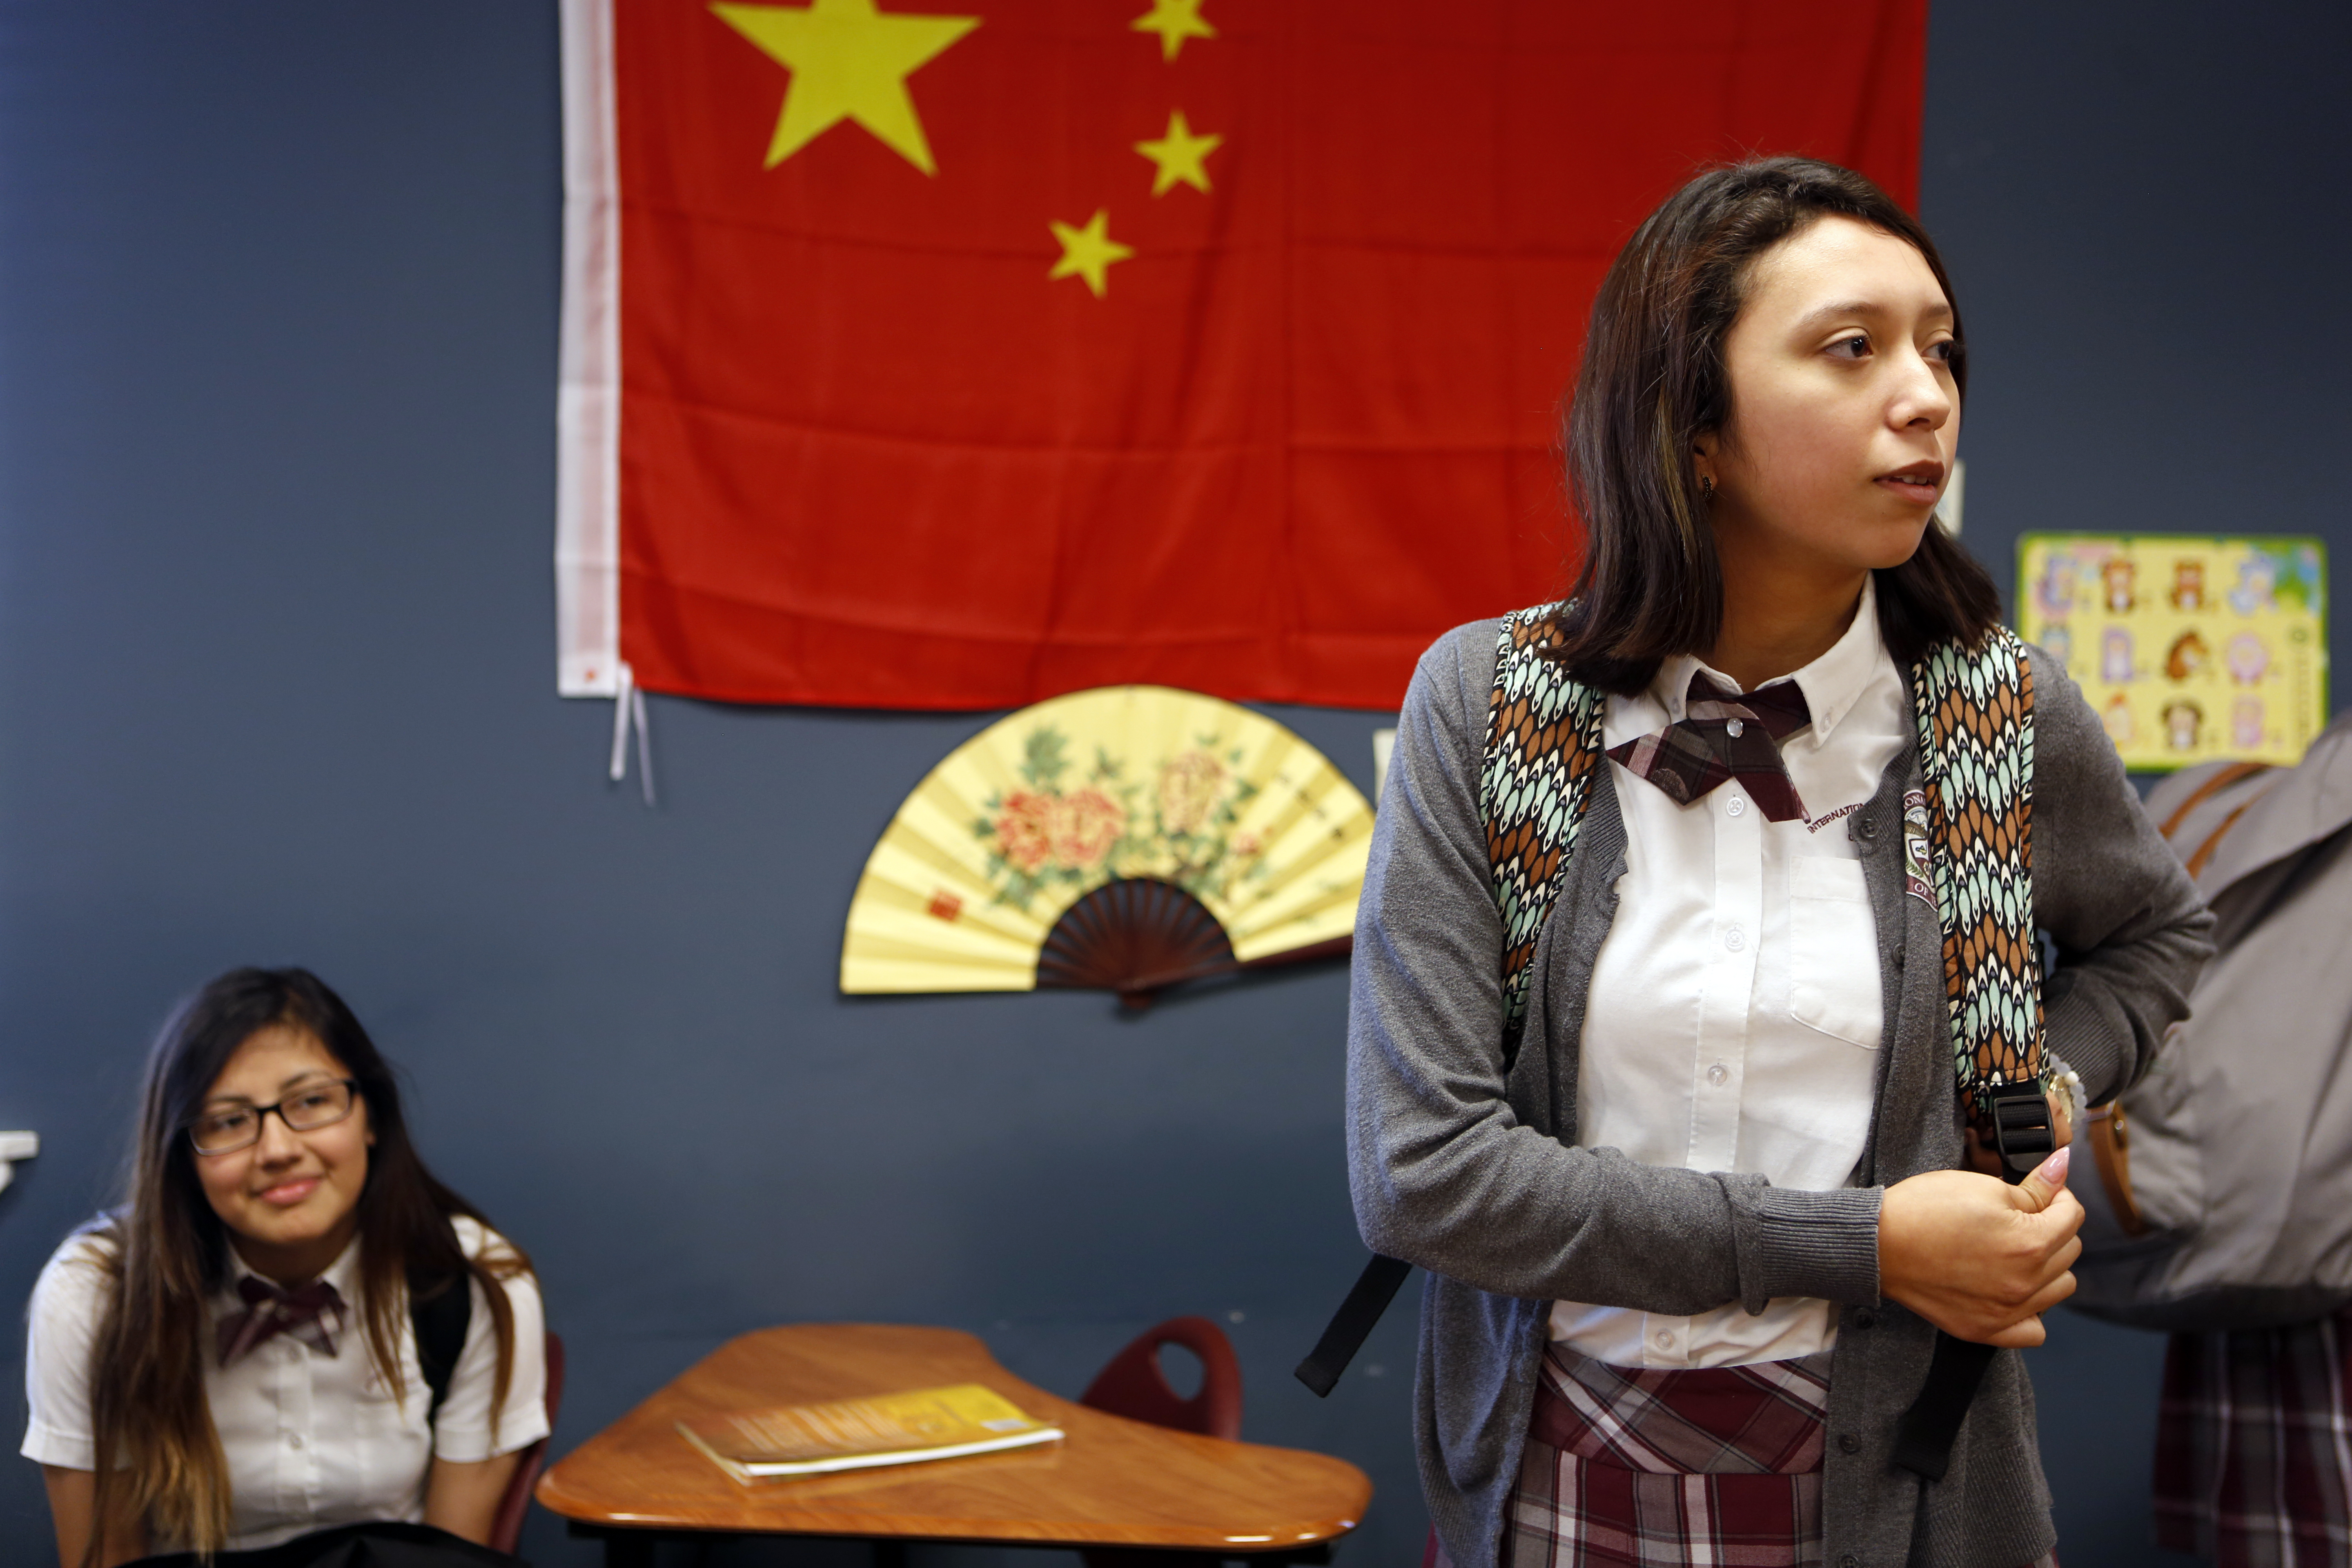 Alex Gutierrez, right, and Olga Sandoval wait for the bell to ring in their Mandarin Chinese class at International Leadership of Texas Garland High School. Photo/Lara Solt